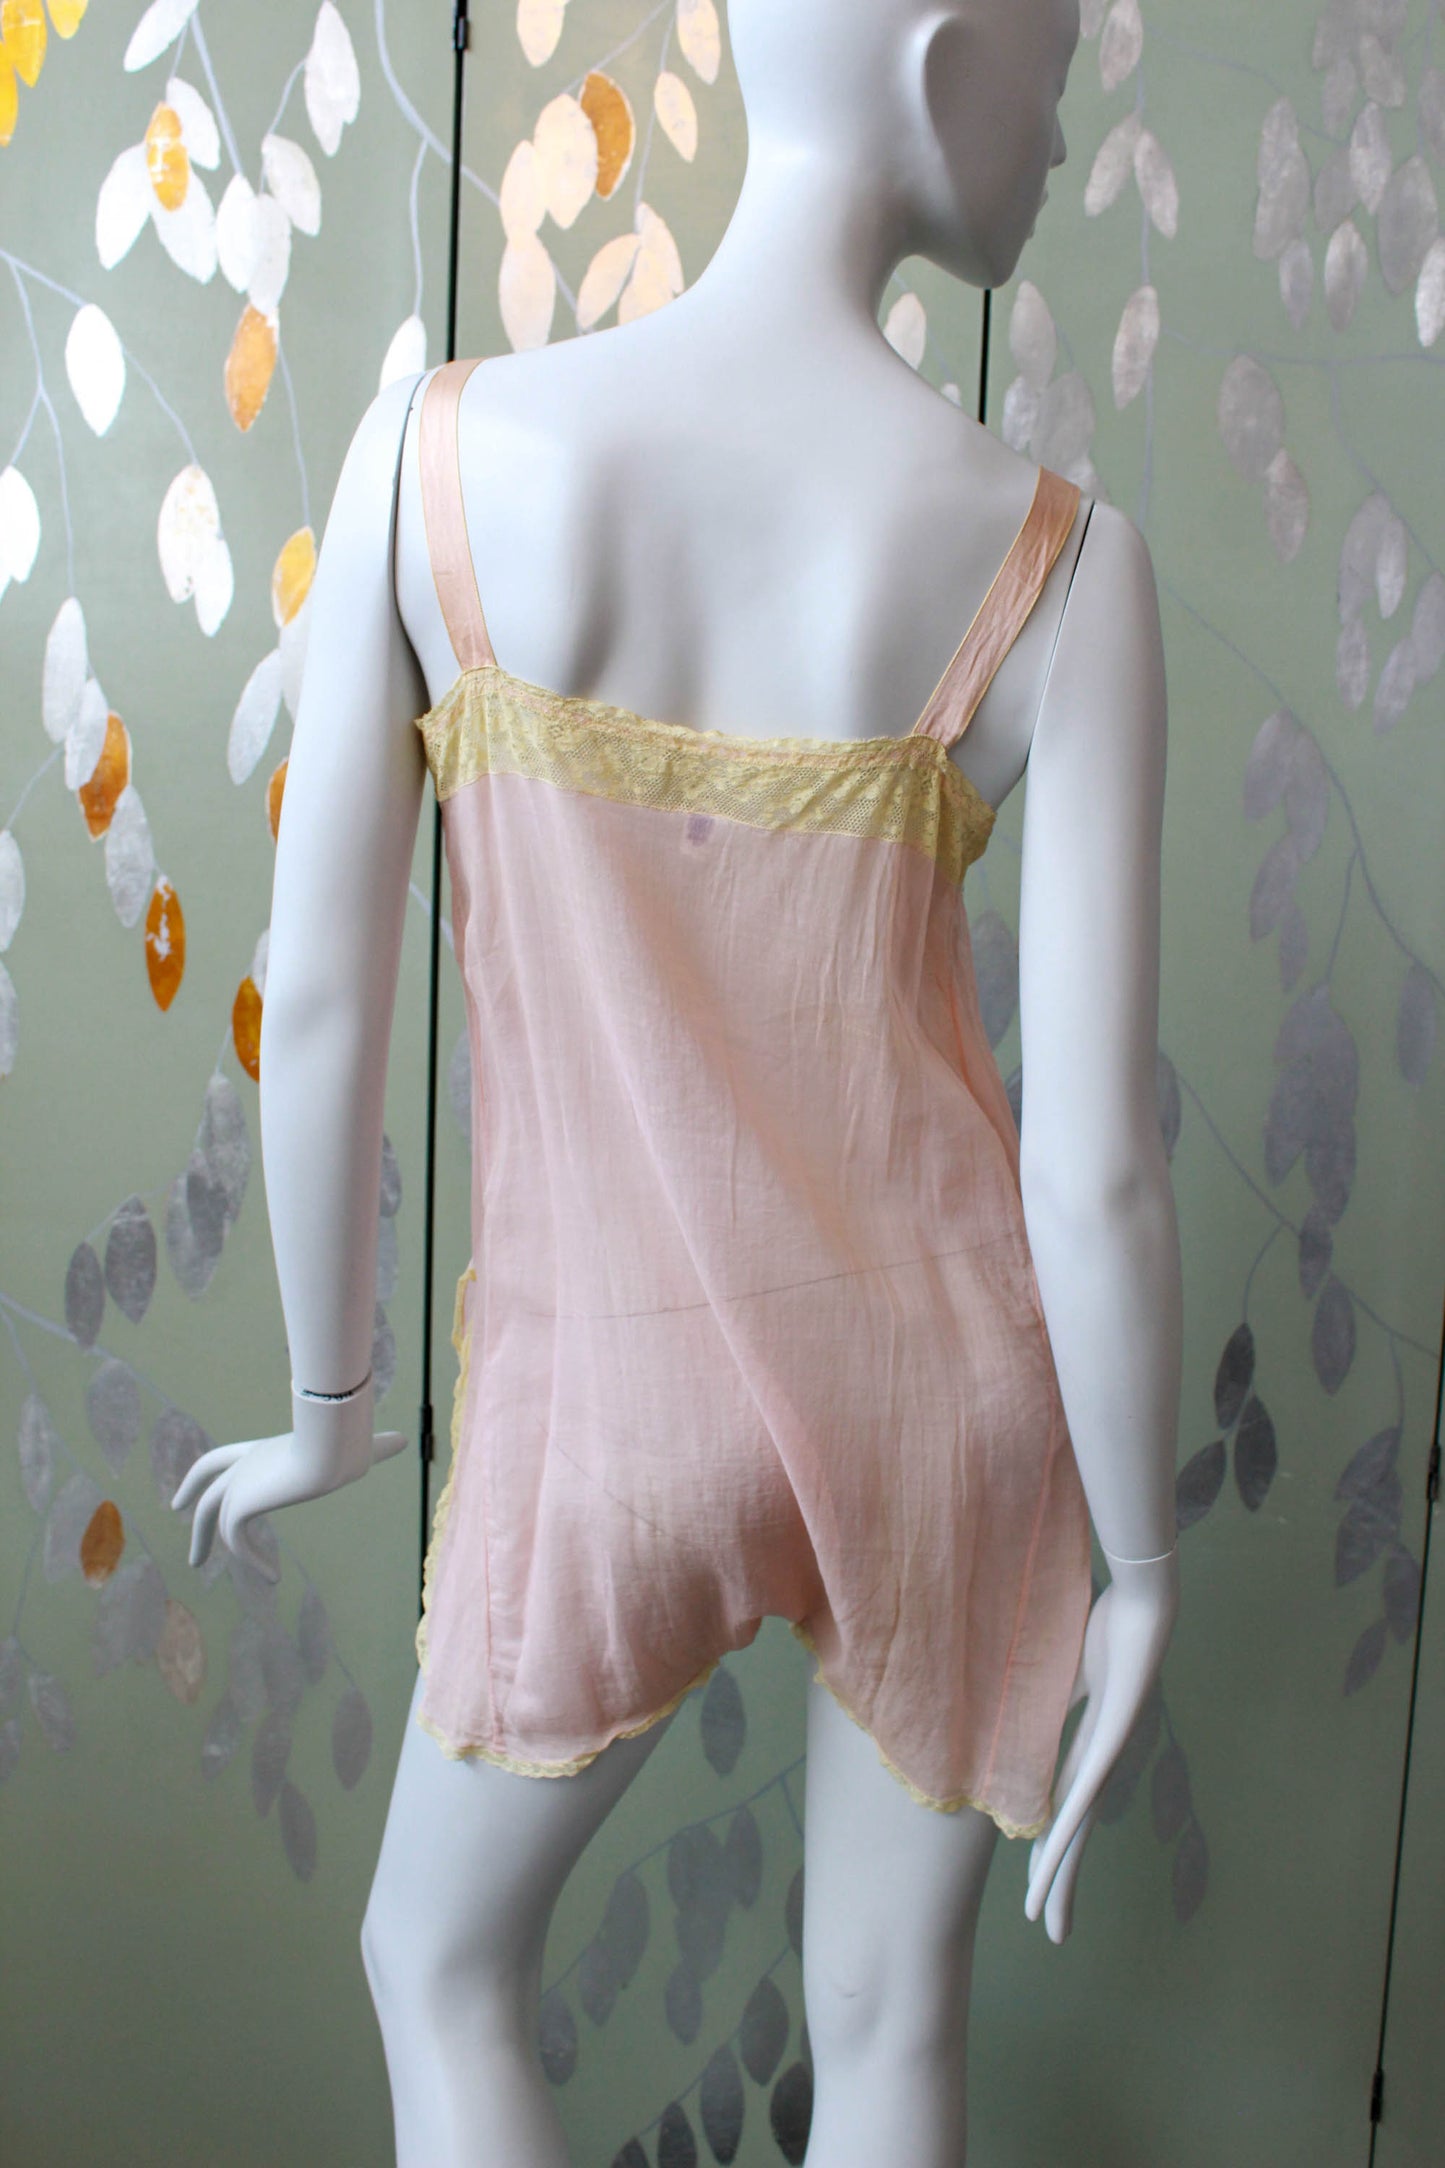 1920s pink cotton step in with lace insert at bust and flower applique. Ribbon straps. Slit up legs, lace trim. antique lingerie flapper style